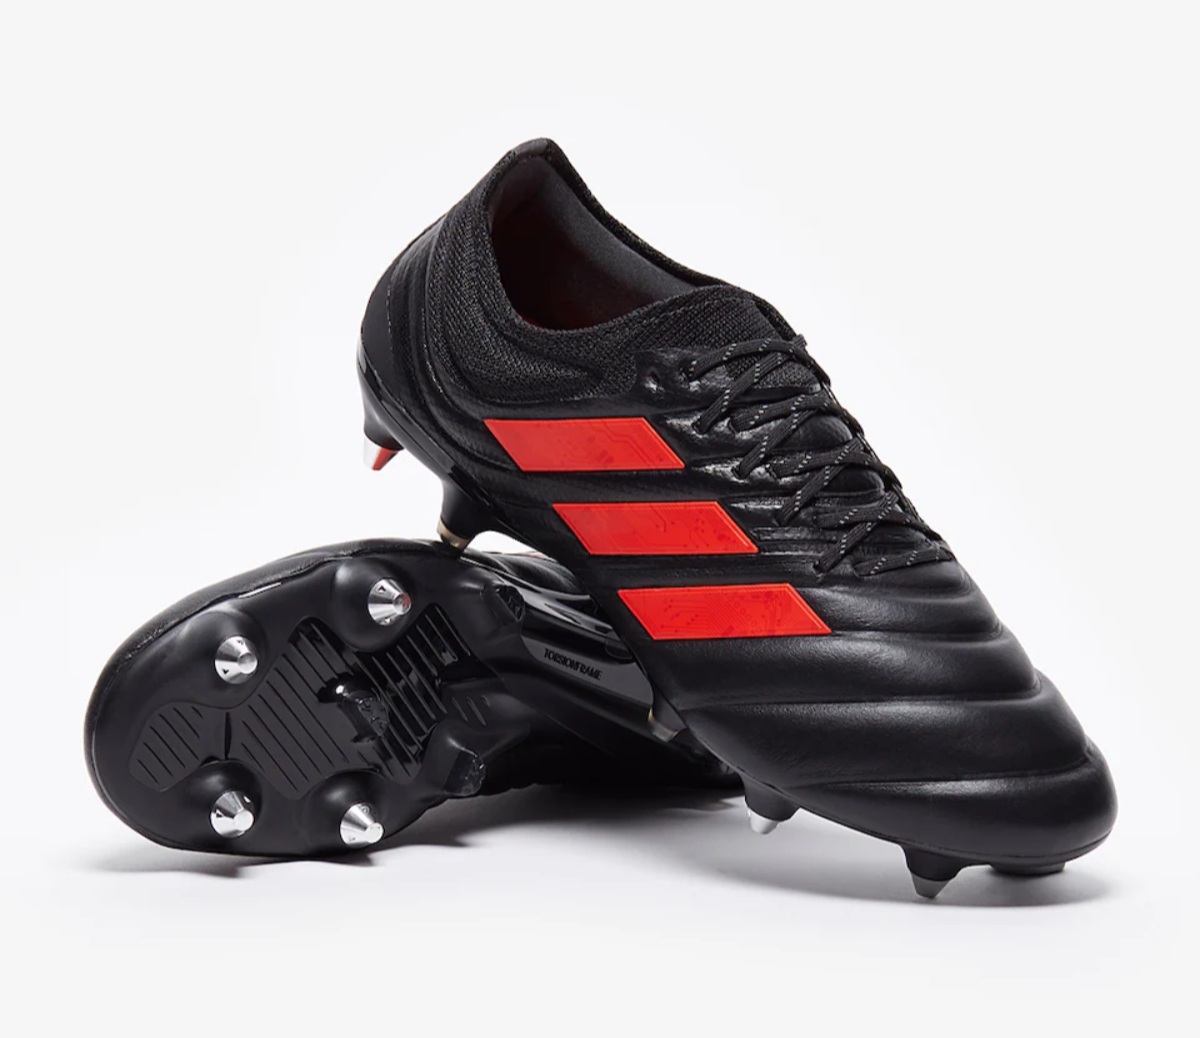 Adidas Copa 19.1 Red and black